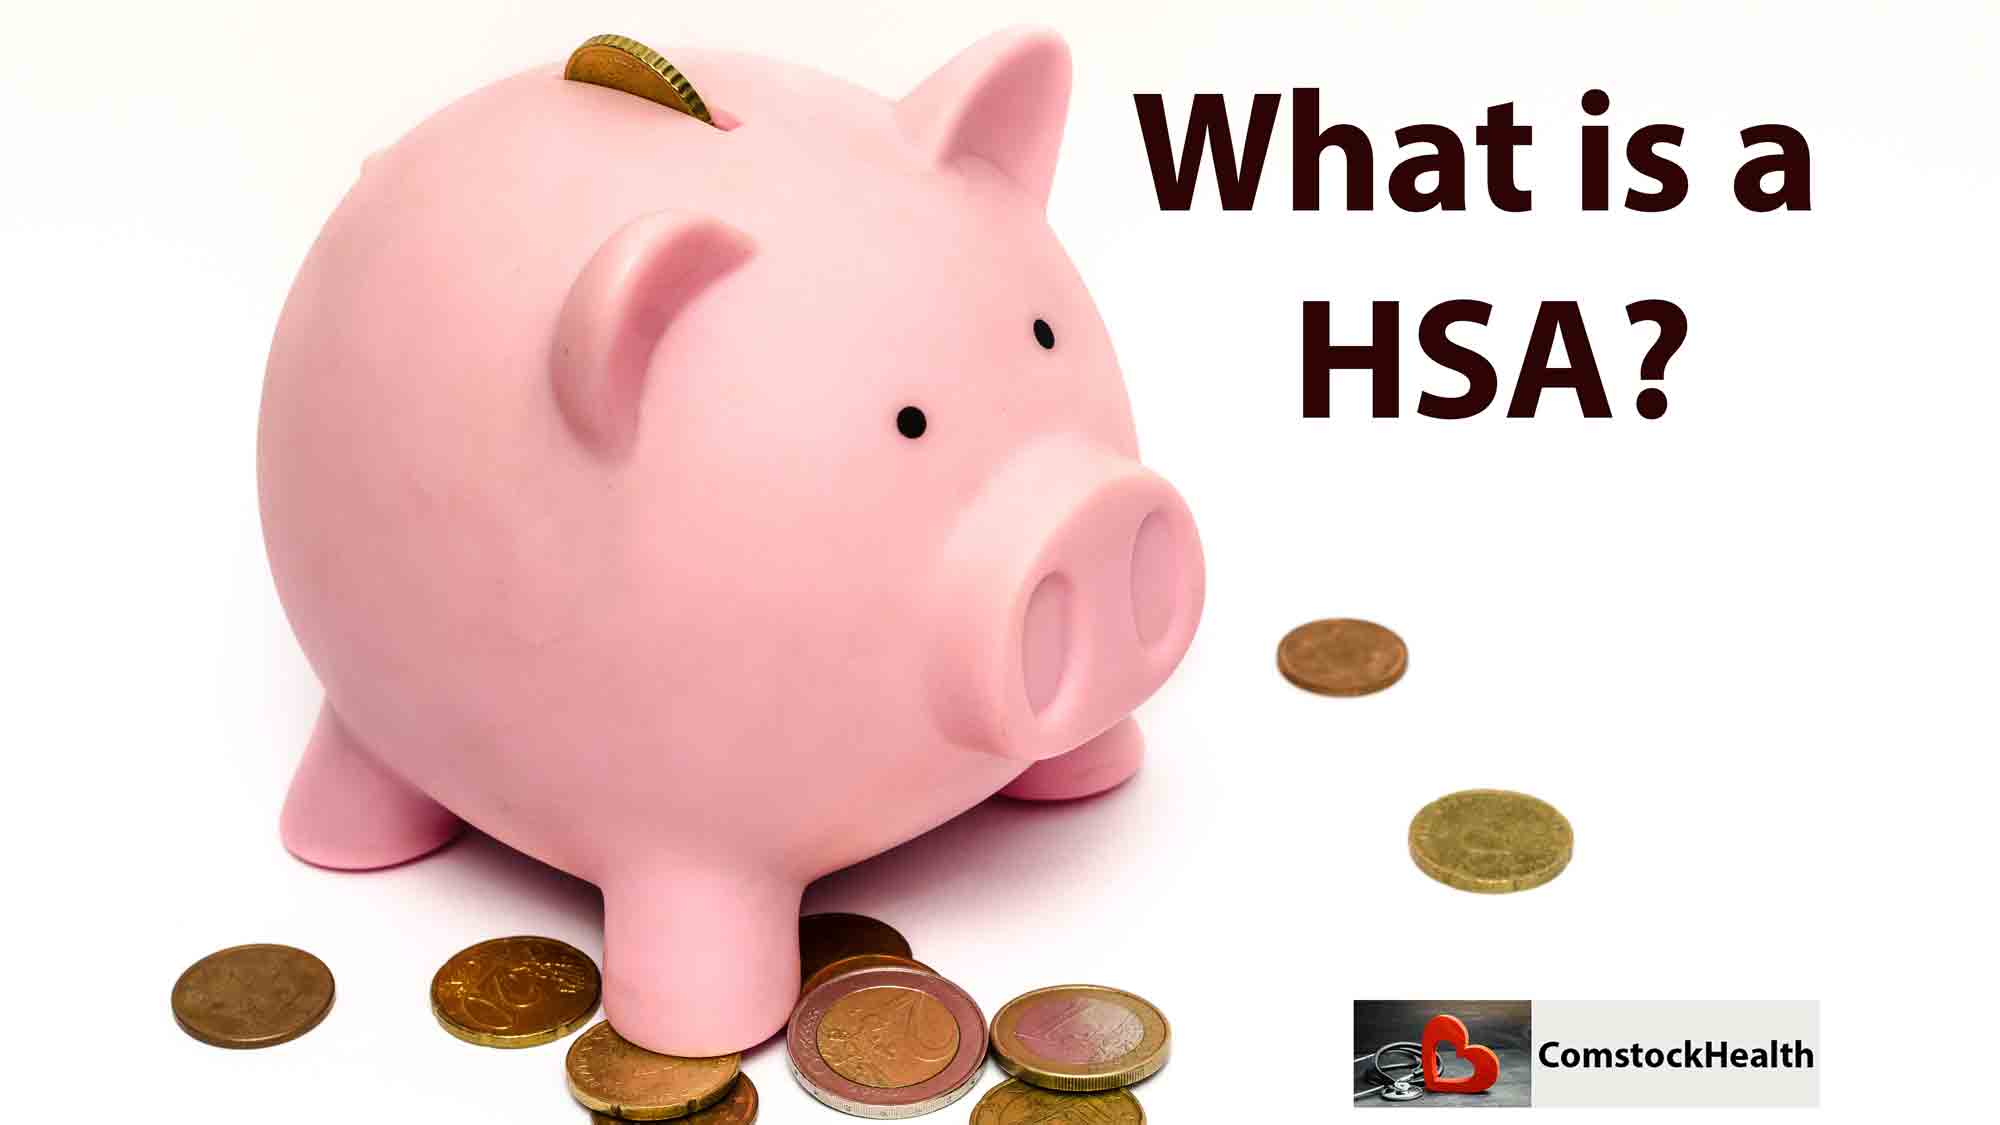 What is a HSA?